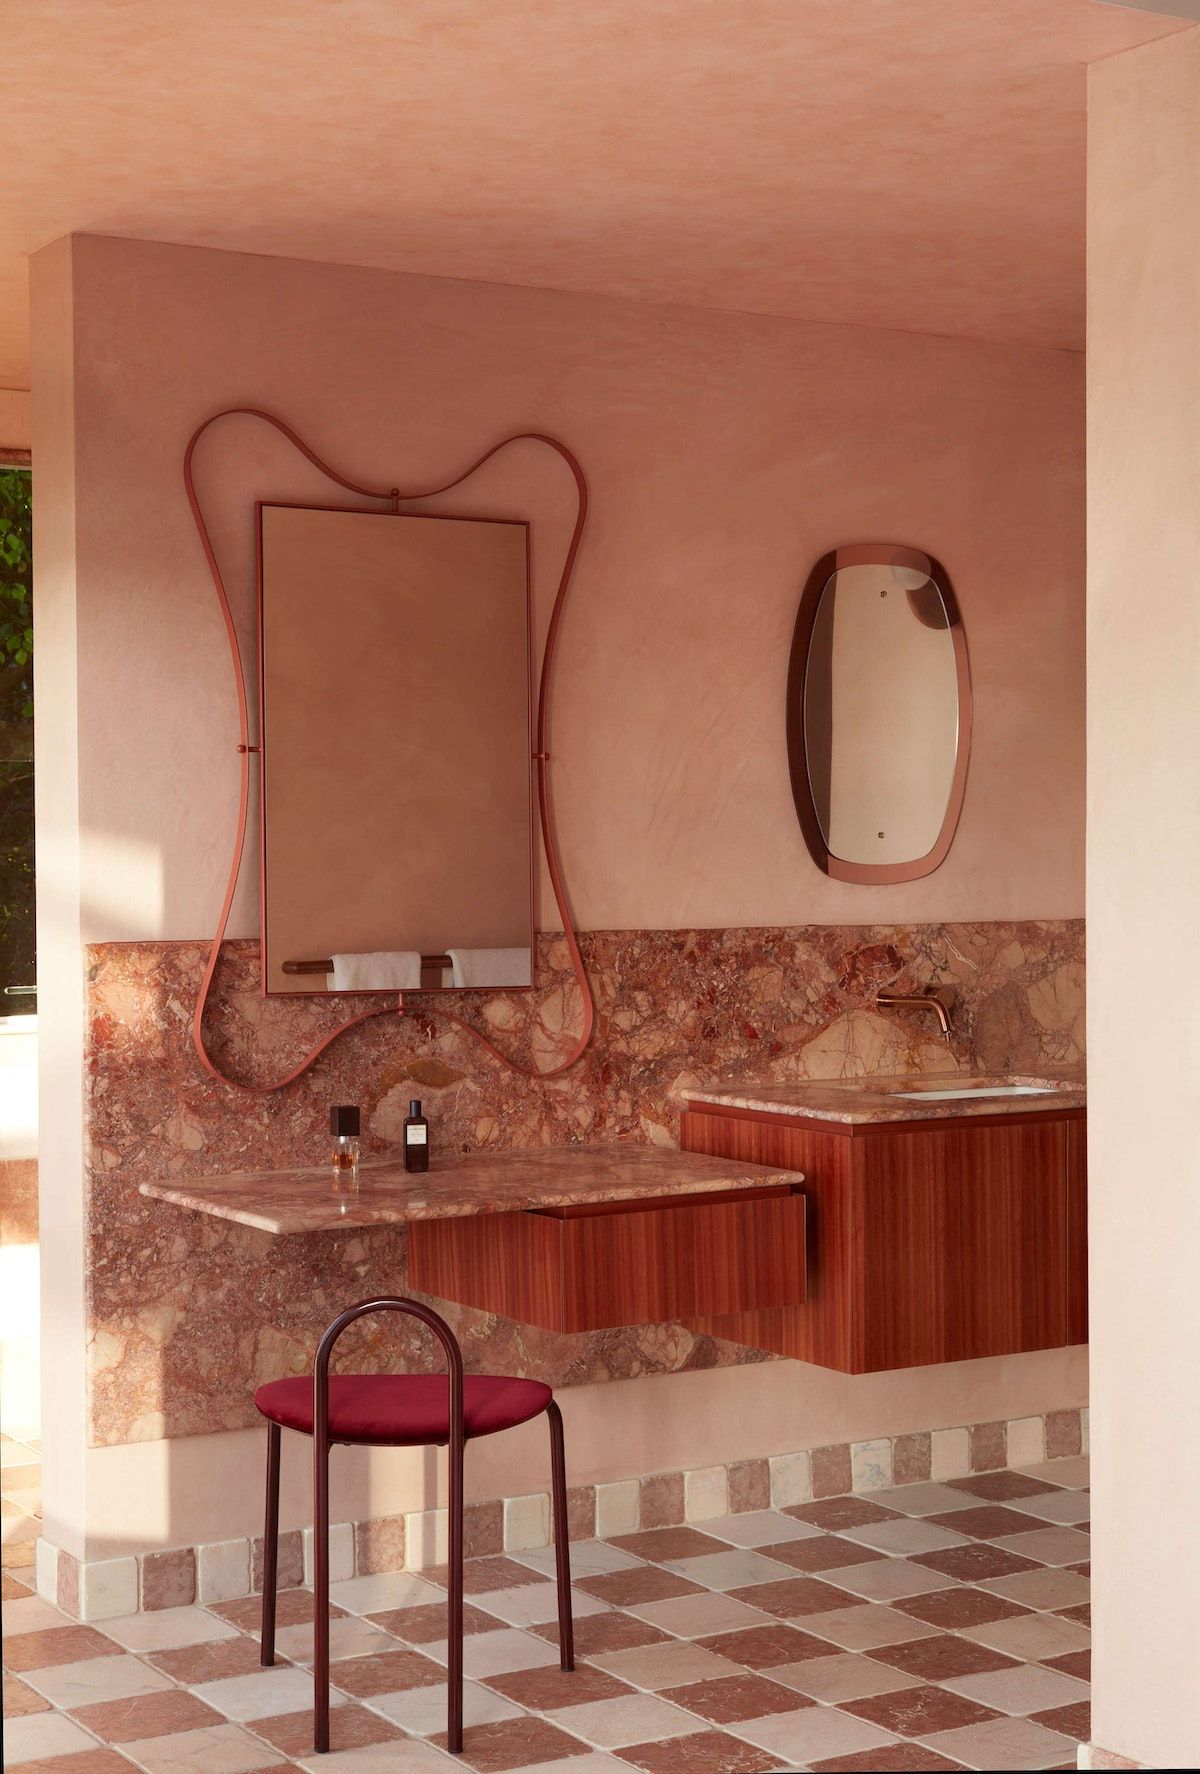 La Palma by YSG Studio. Bathroom influenced by remote mexican shores with a twist of Cote d'Azur's refinement. 